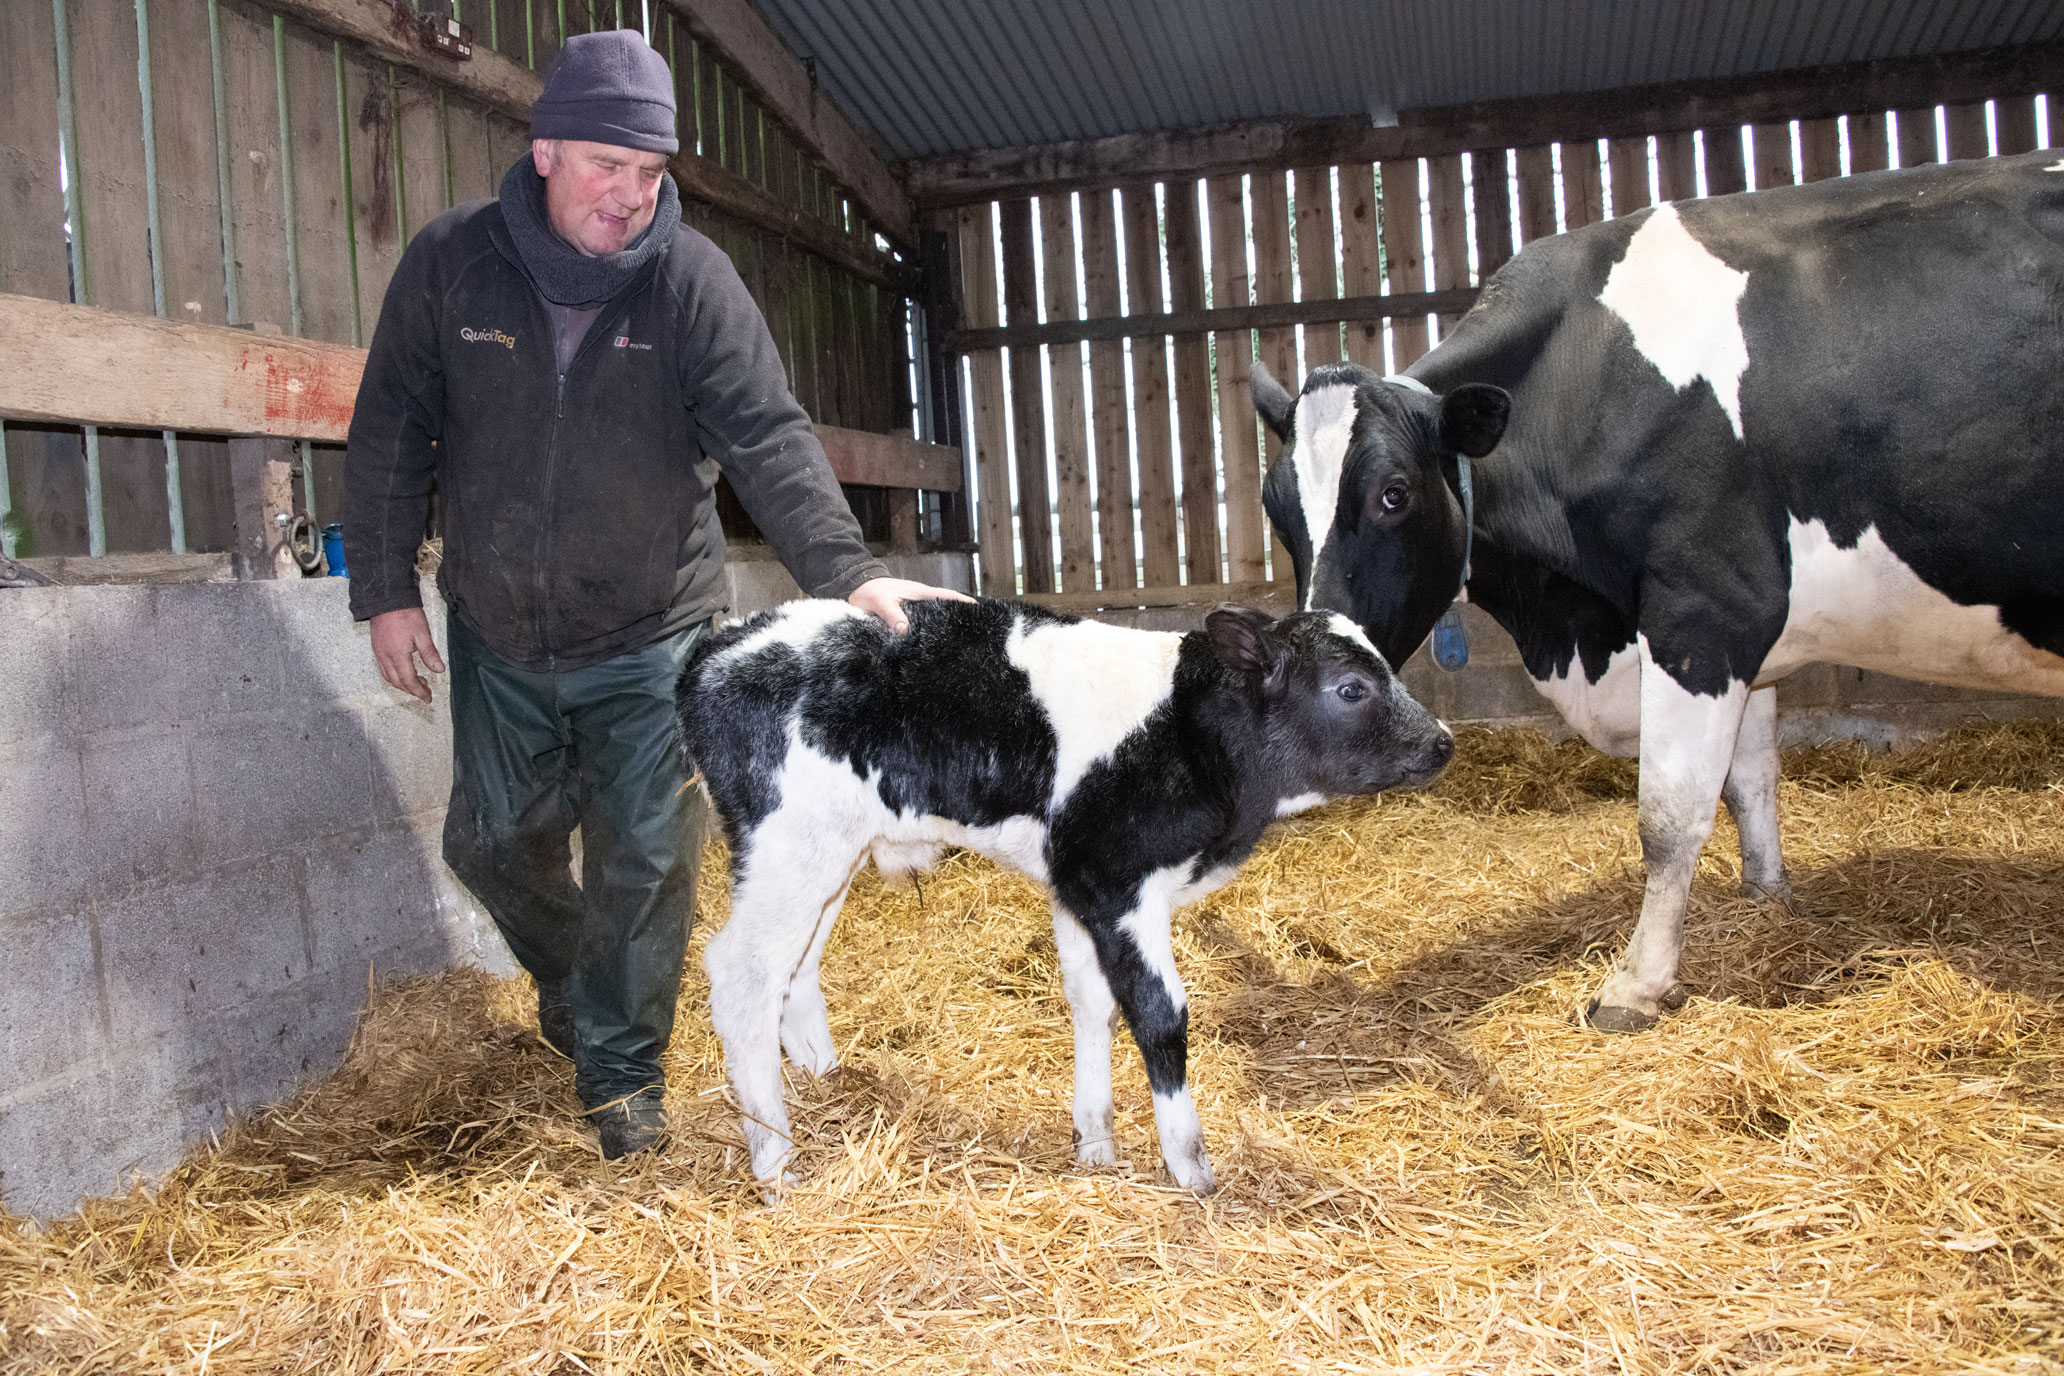 Farmer with a young calf in a strawy pen